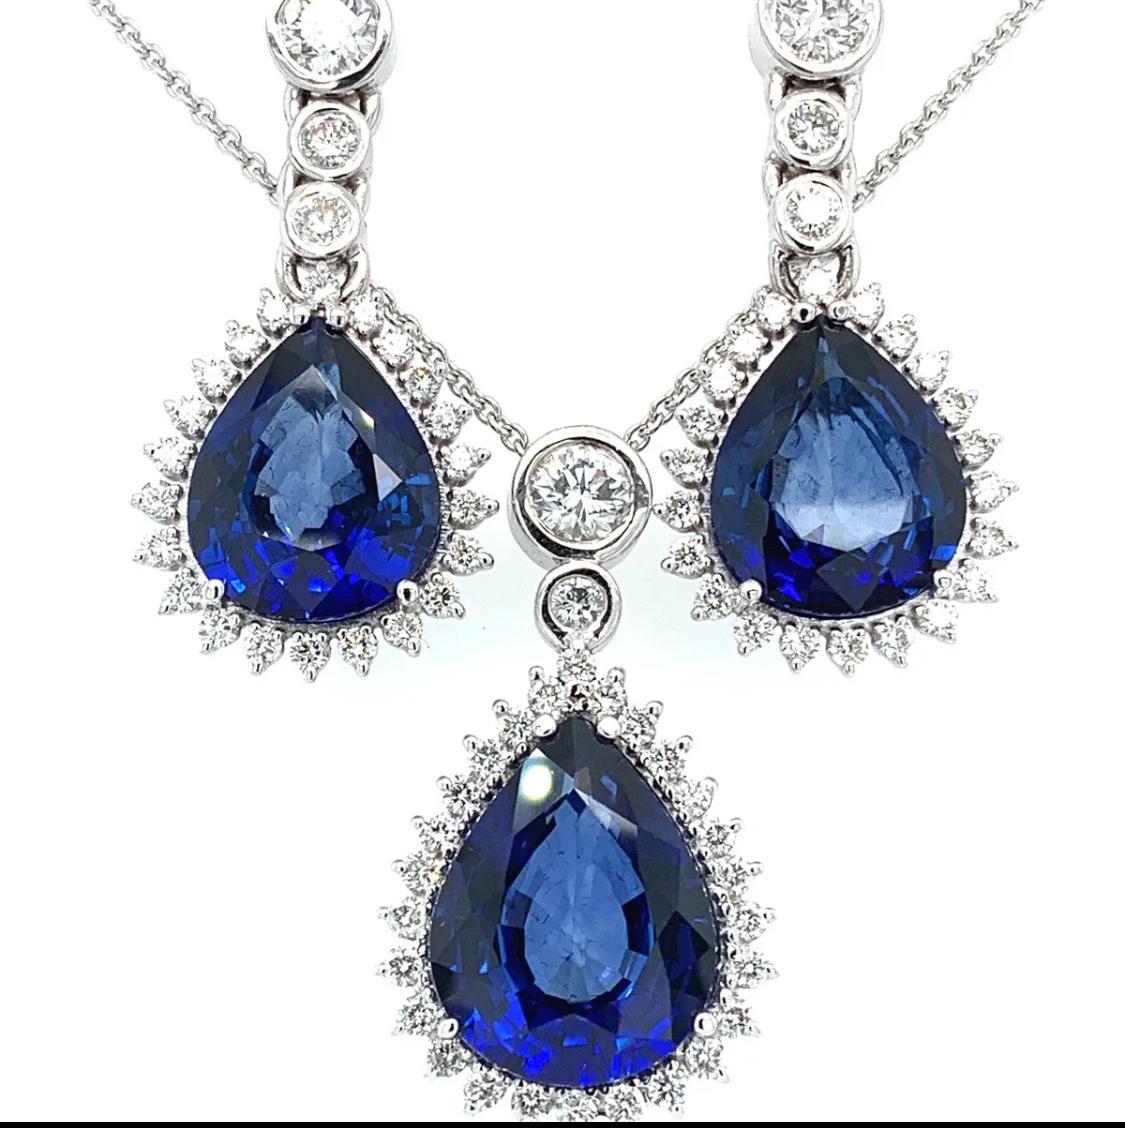 Sapphire and diamond pear cut art deco drop necklace and earrings set 18k gold
Gorgeous pear shaped blue sapphire and diamond halo cluster surrounding each jewellery piece all mounted in 18k white gold
Sapphire pear cut treated gemstone total weight